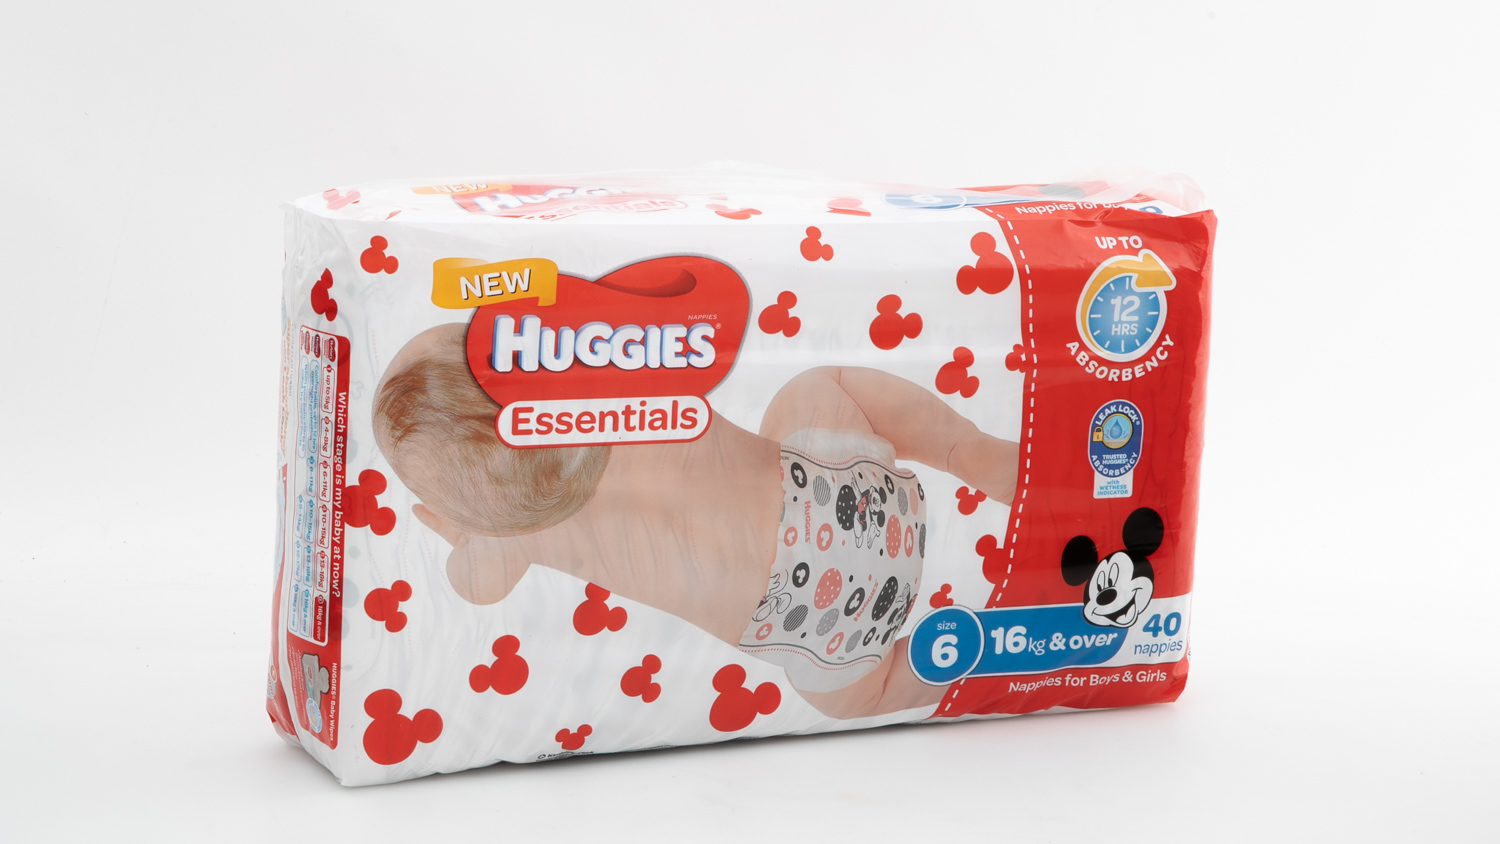 Huggies Essentials Size 6 Nappies carousel image